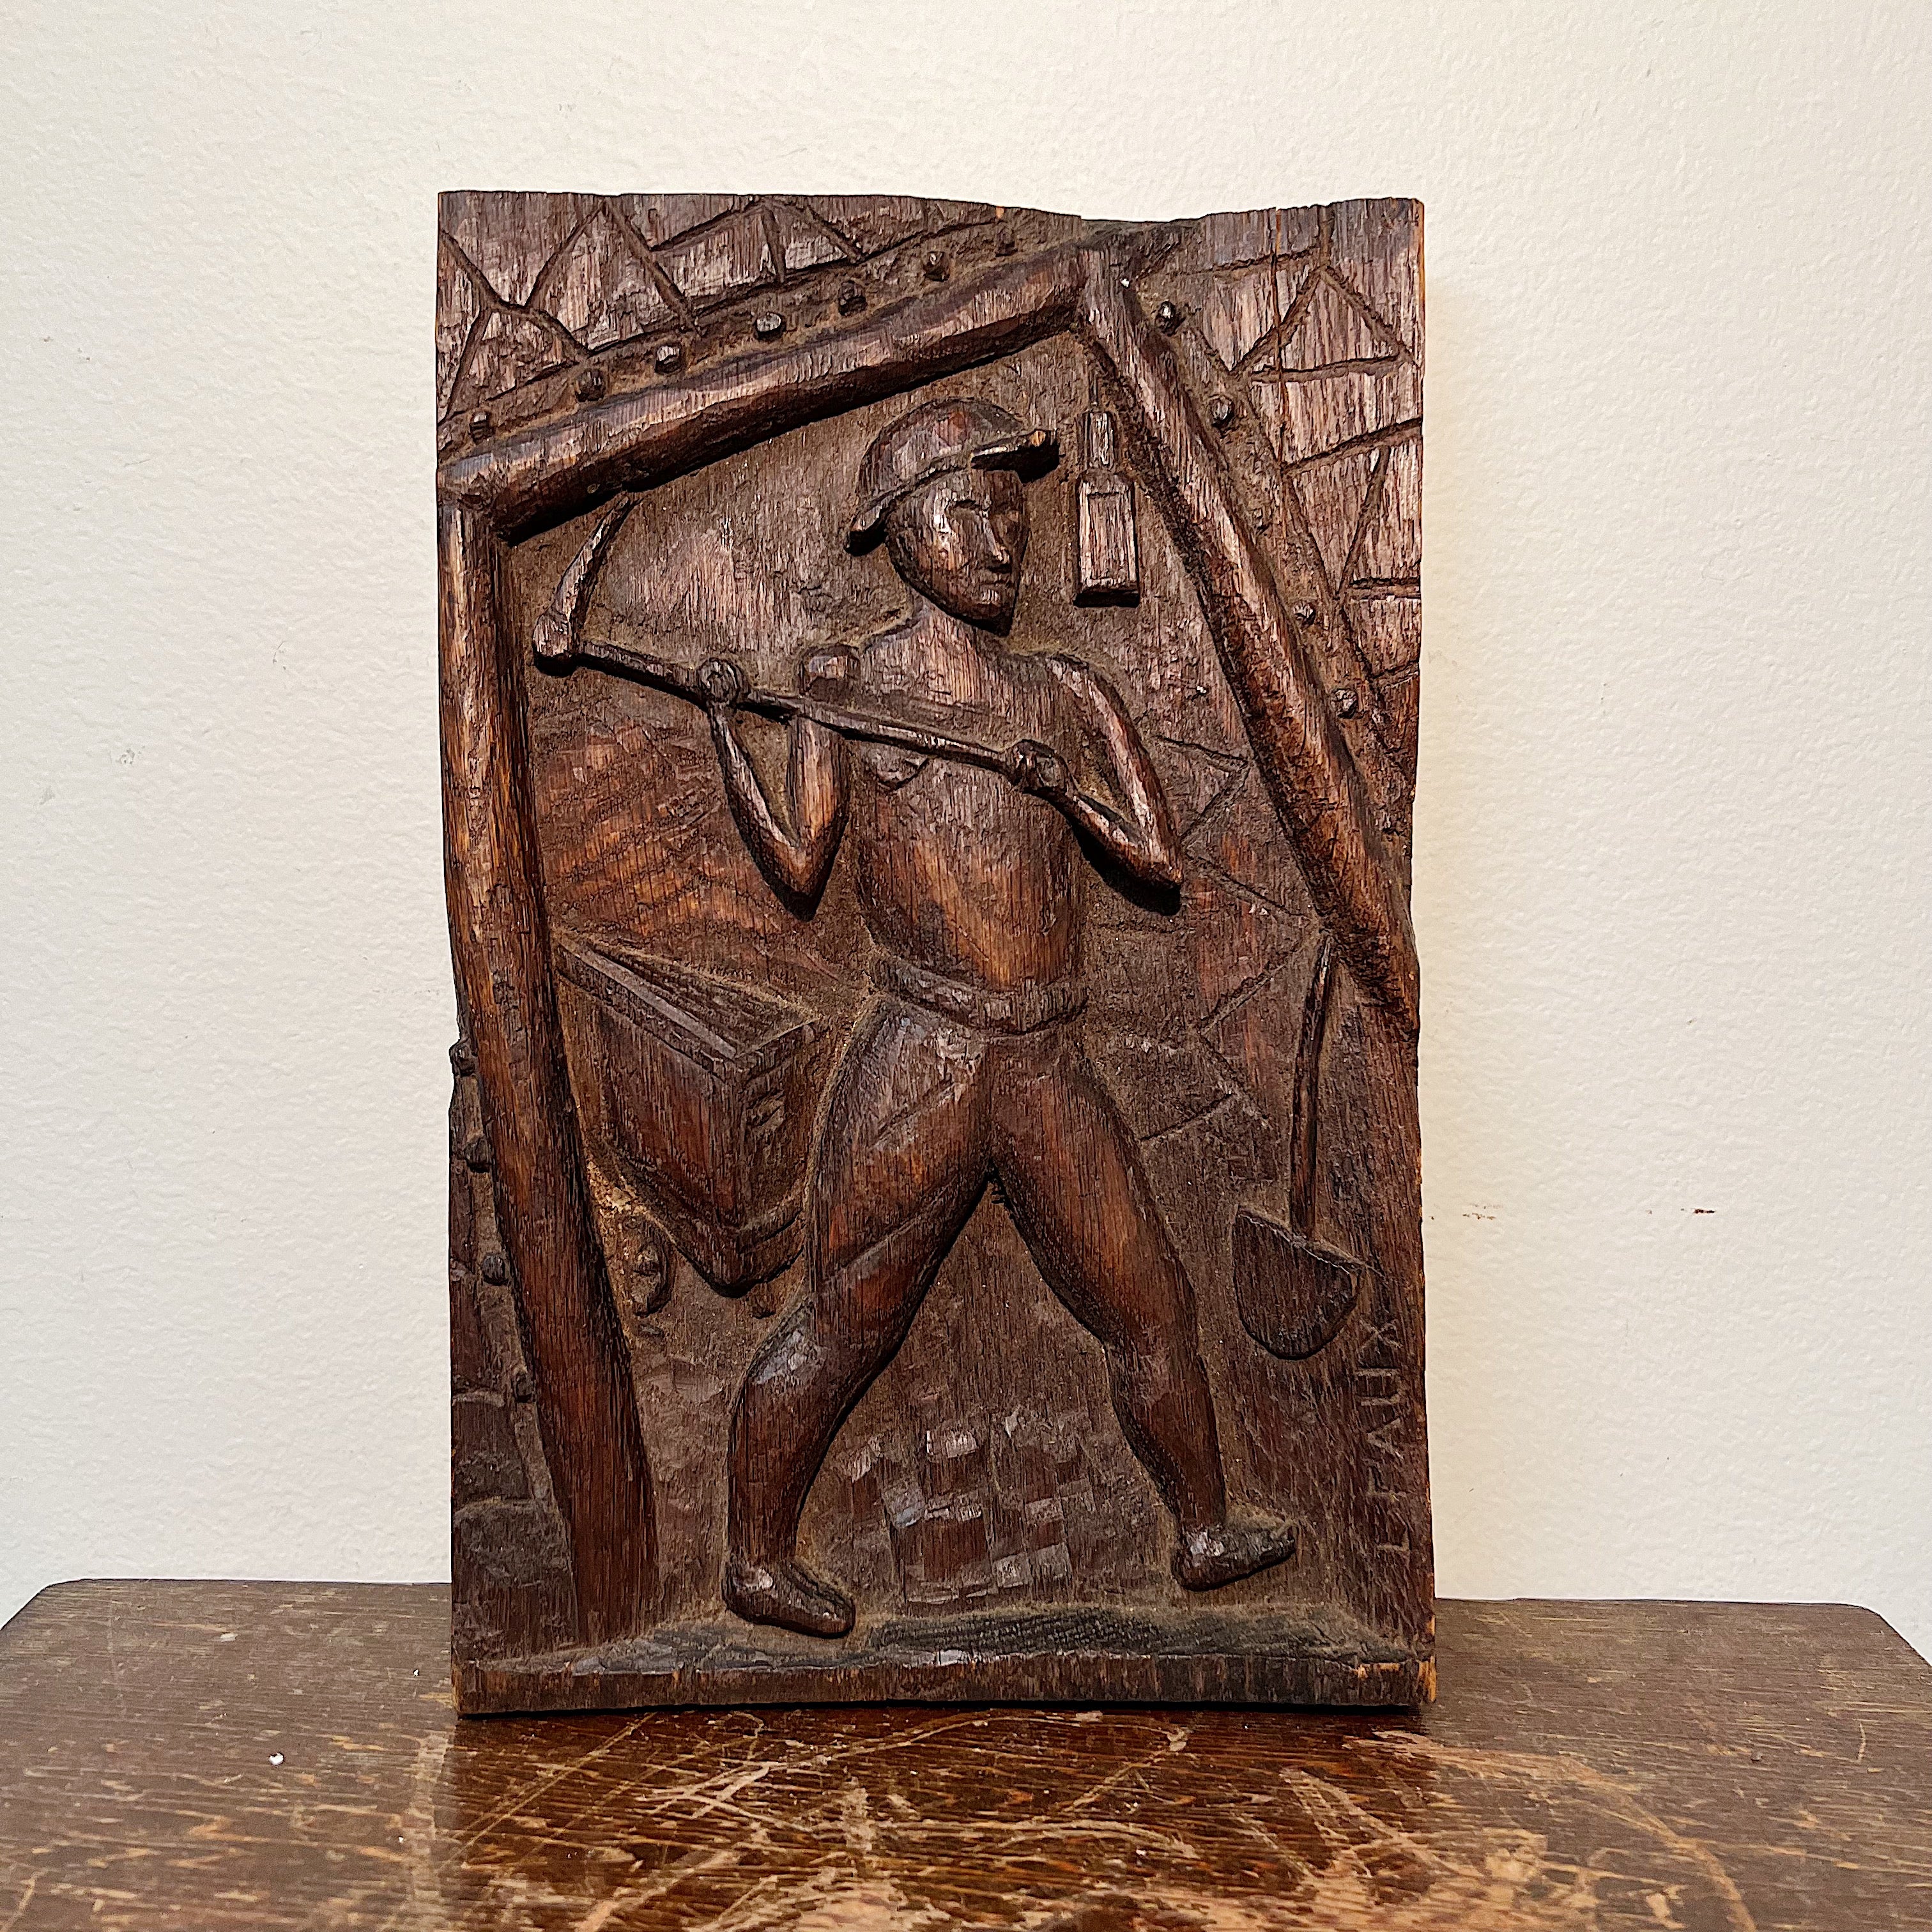 Rare1940s Folk Art Plaque Carving of Miner Swinging Pick Axe - Signed L. Faux - Antique Wood Carvings - Eclectic Wall Art - Rare Vintage